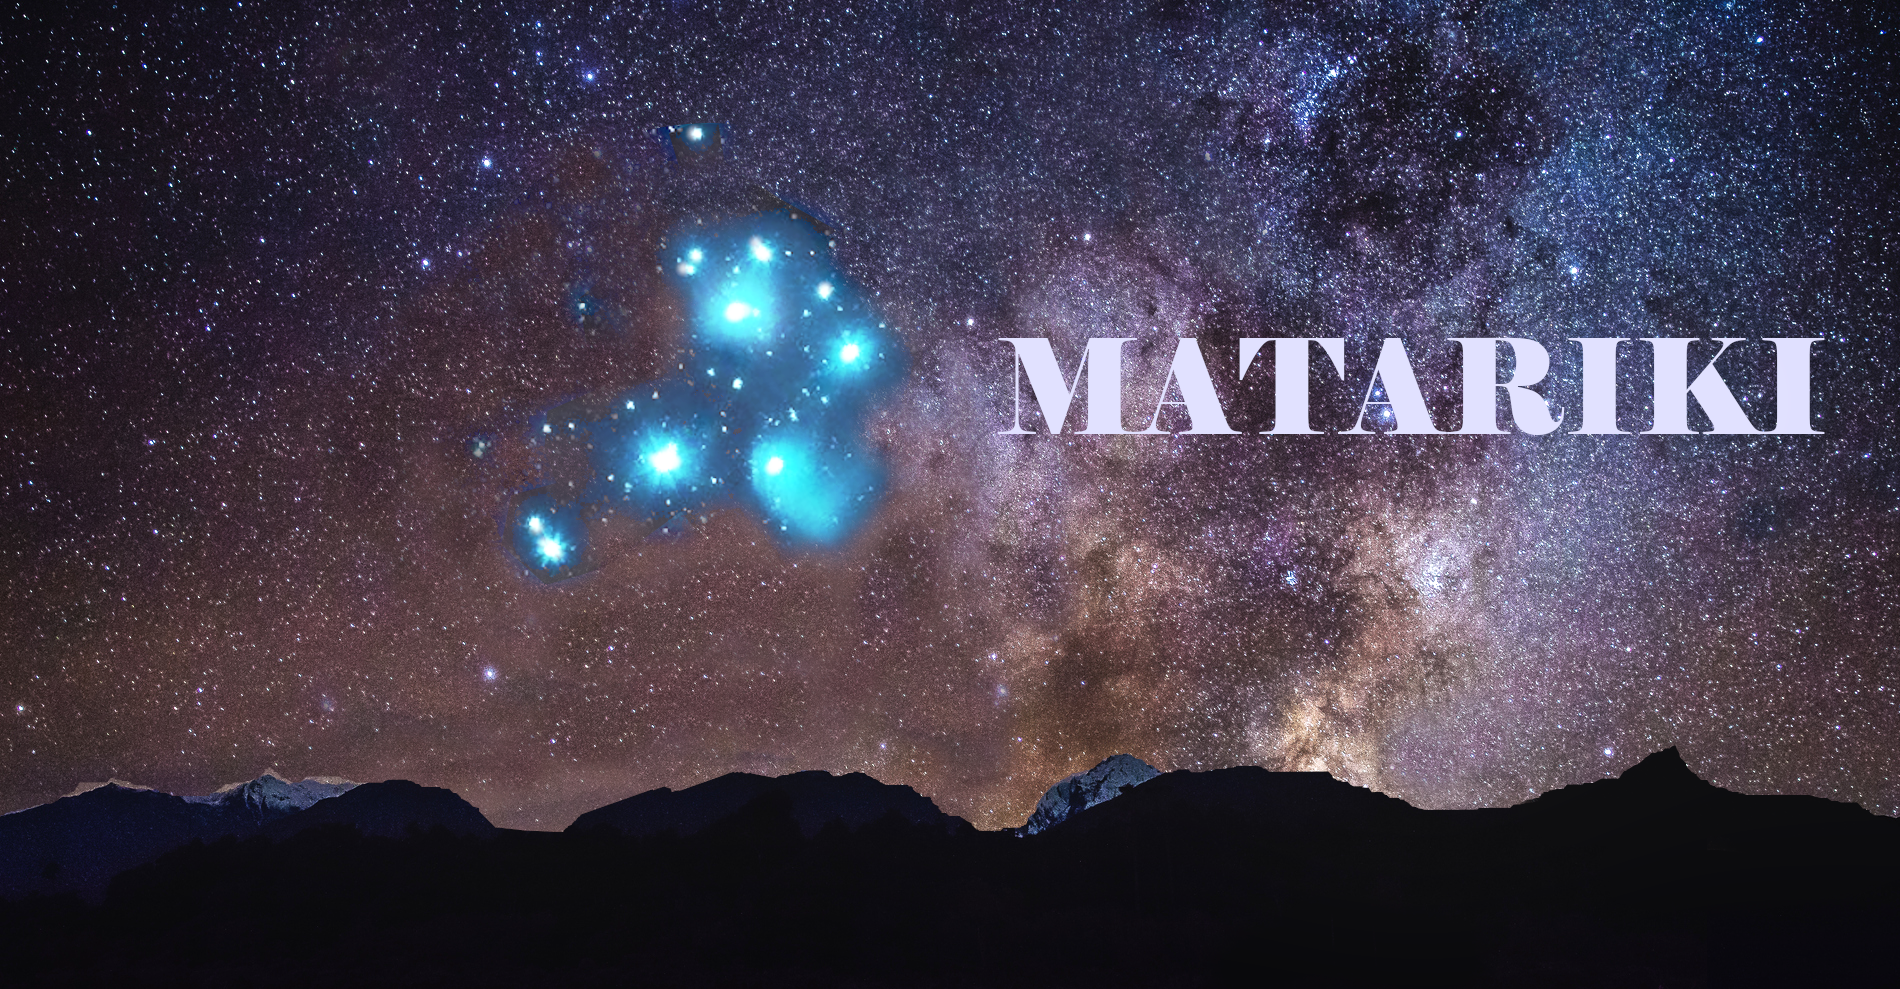 Matariki 2021 - a catalyst for change, and a reminder to remember